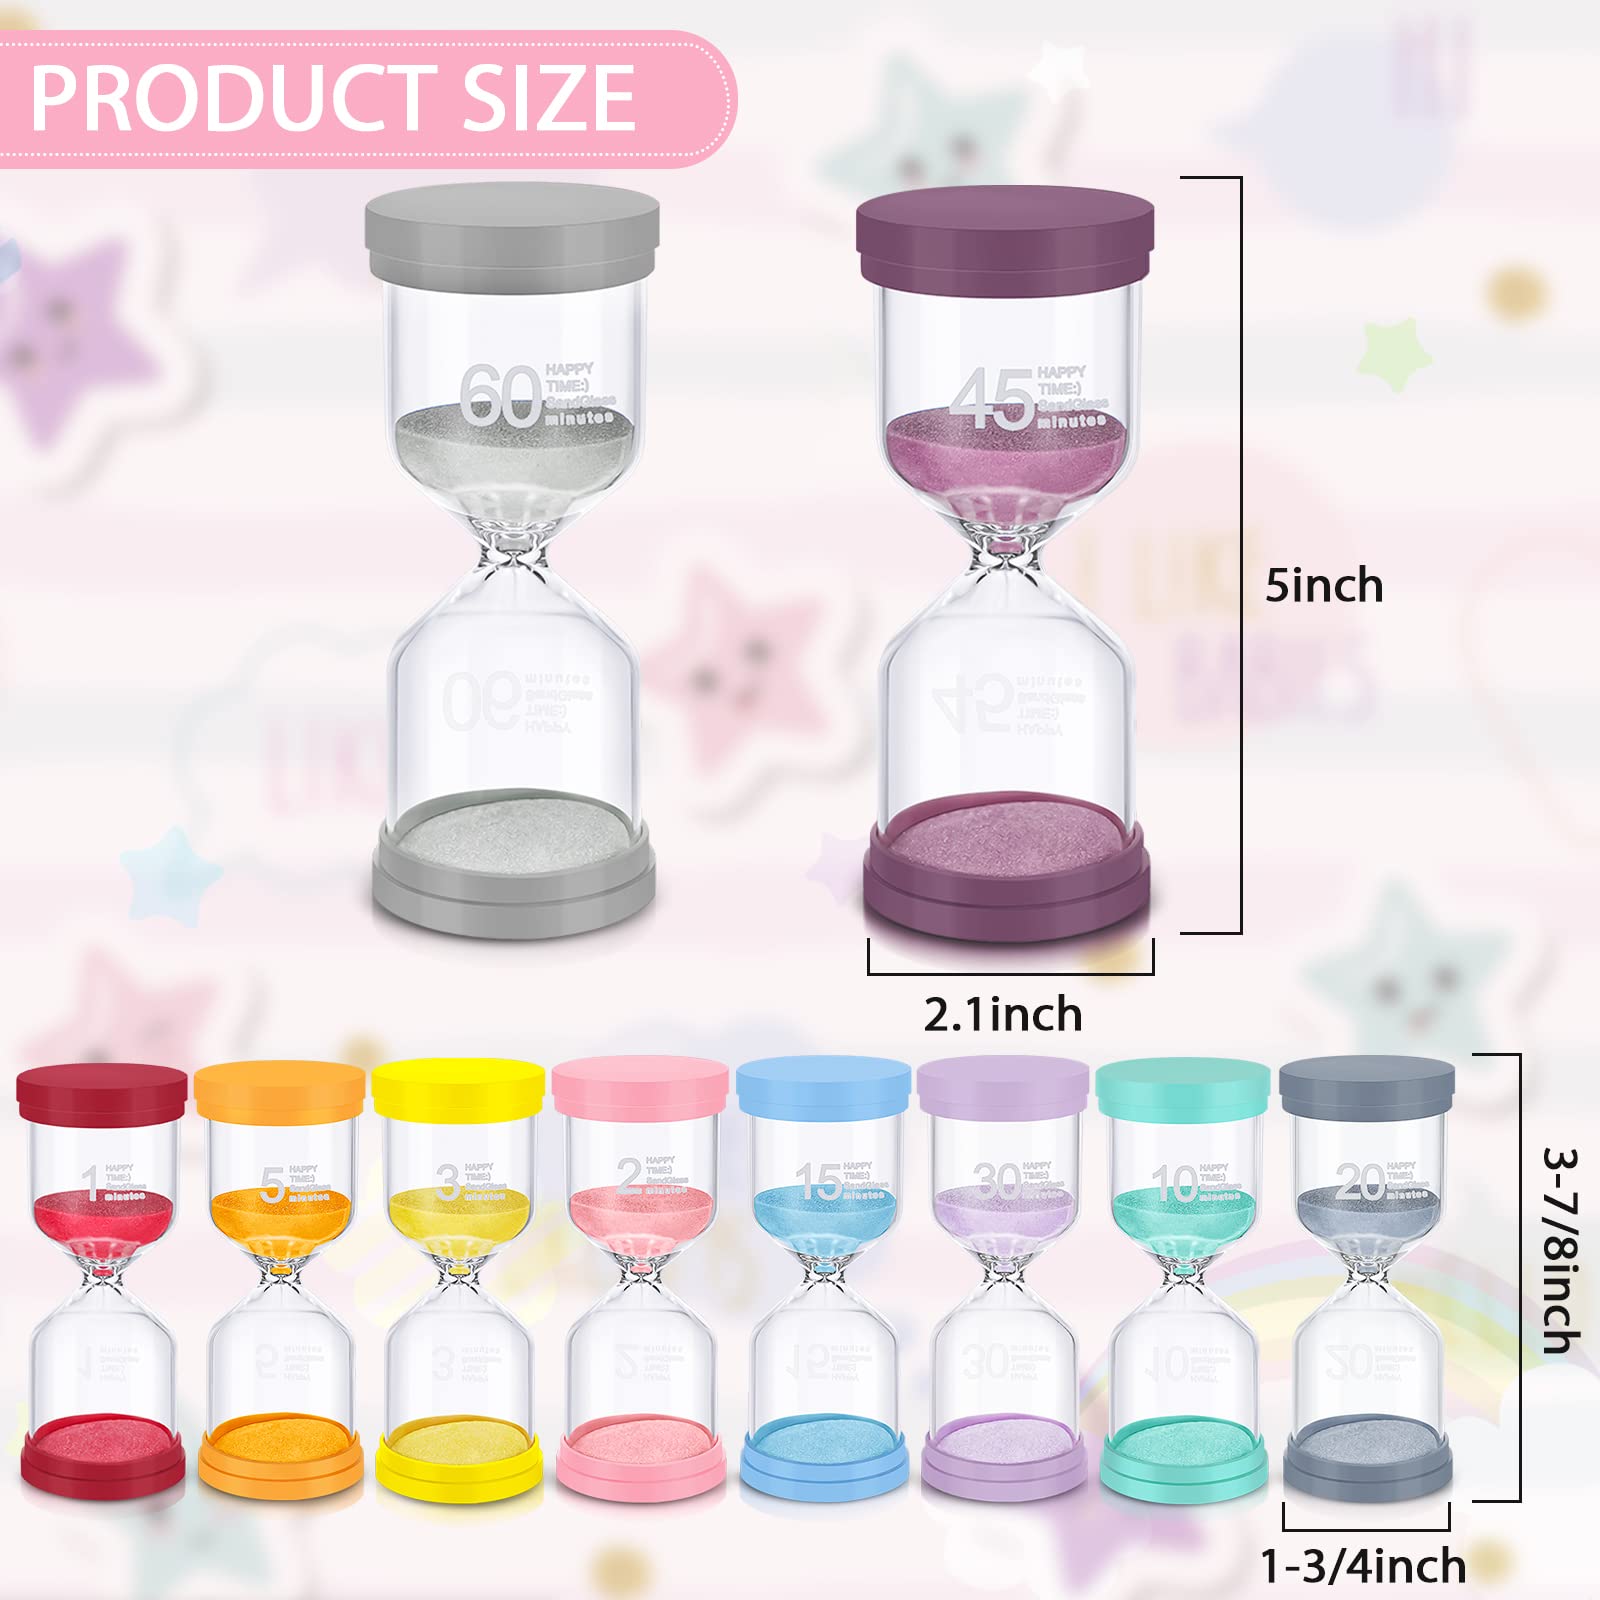 10 Pcs Sand Timer for Children Colorful Hourglass Timer 1/2/3/5/10/15/20/30/45/60 Minutes Visual Toothbrush Timer Colored Classroom Timer Sand Clock Timer for Game Home Cooking Office Decoration